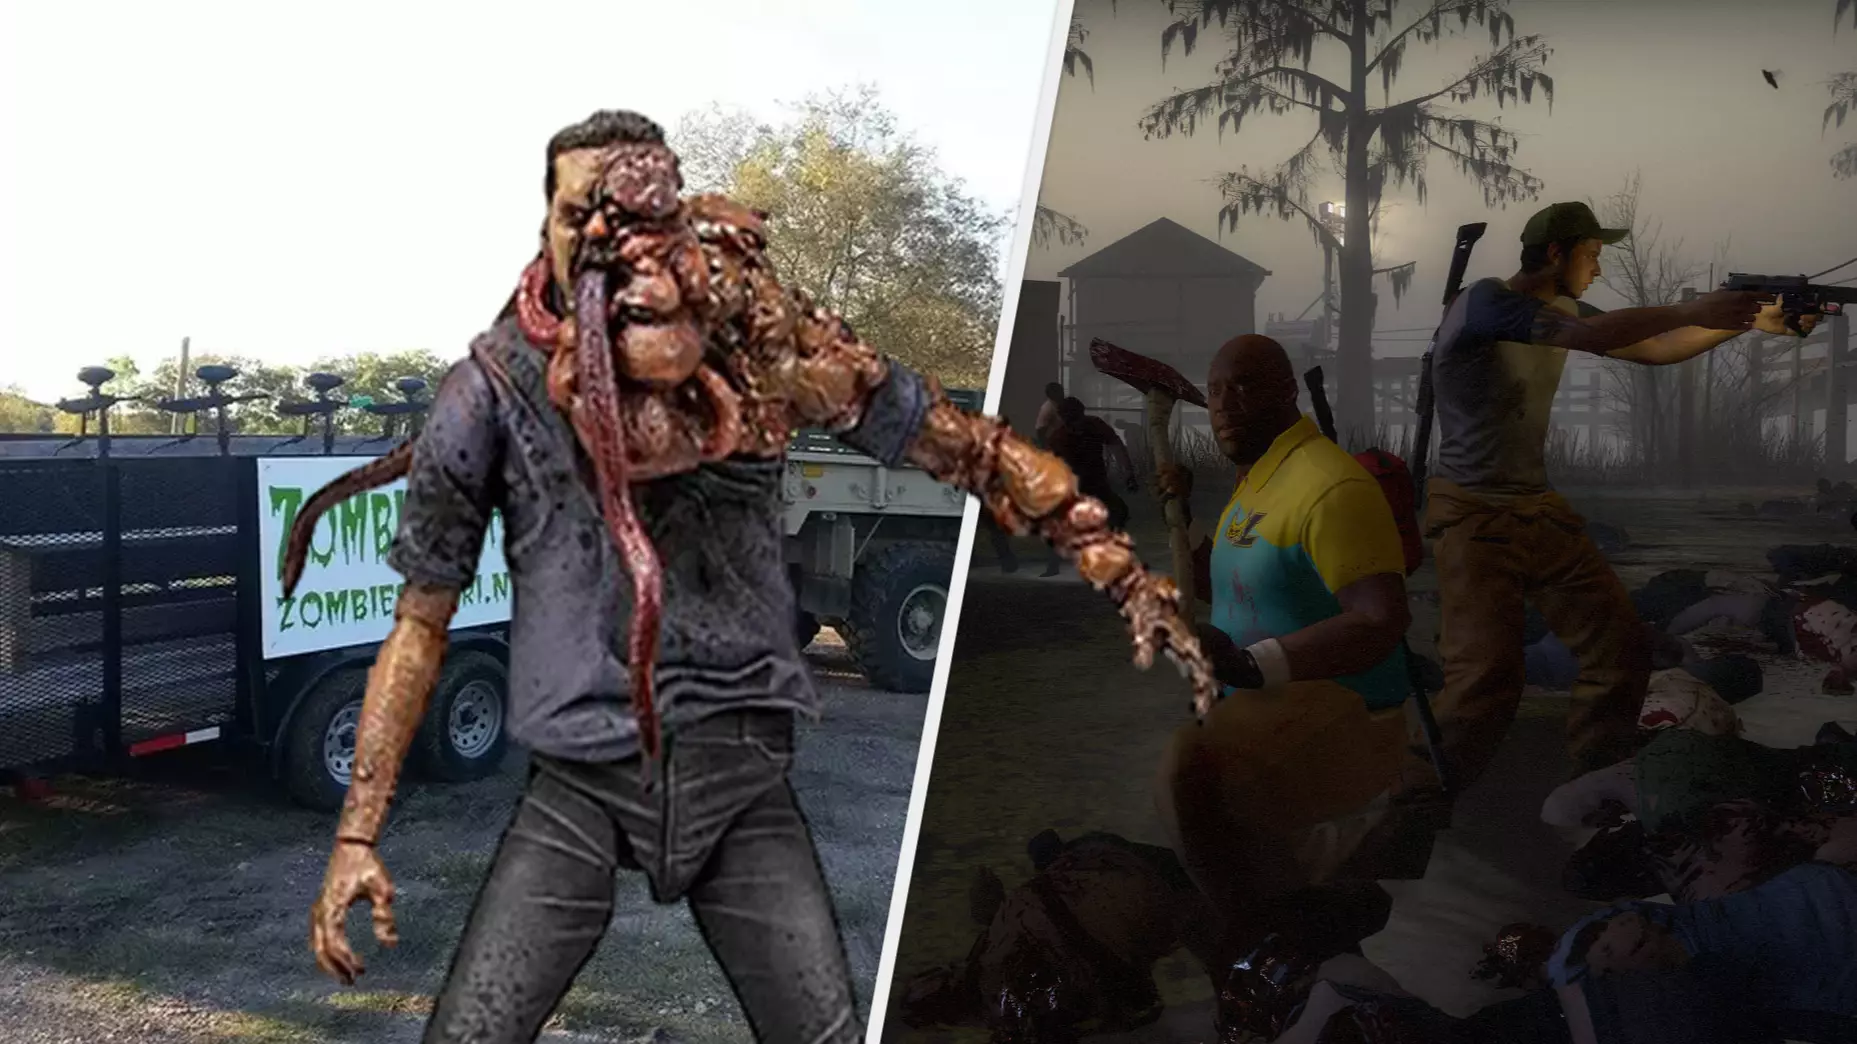 You Can Hunt Zombies In Live Outbreak Experience At Paintball Site